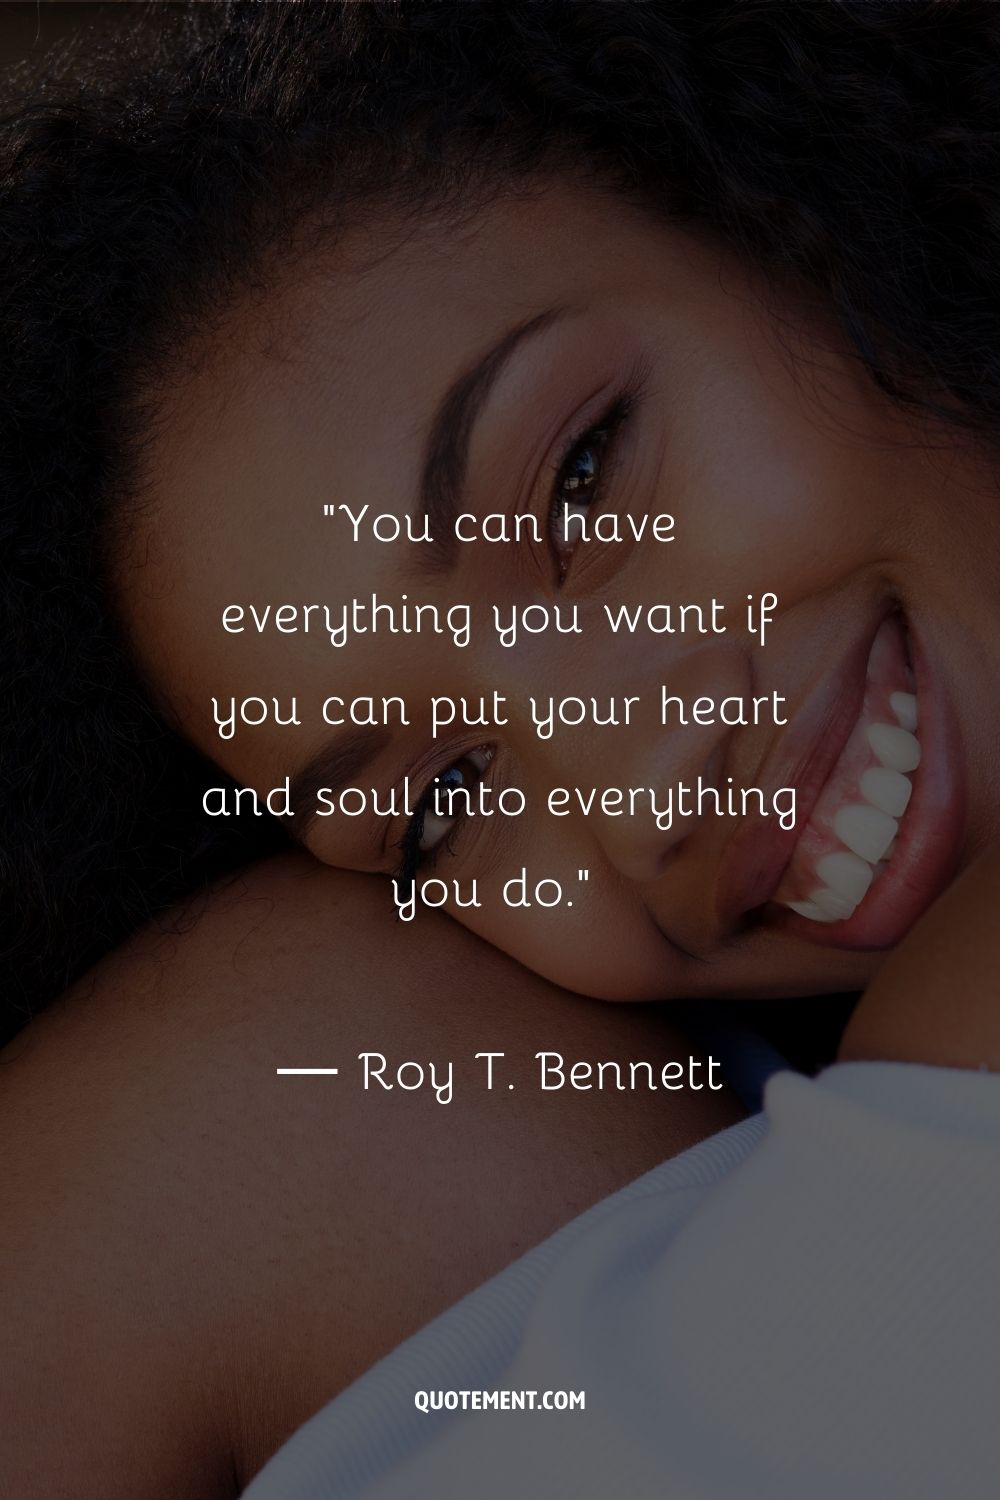 You can have everything you want if you can put your heart and soul into everything you do.